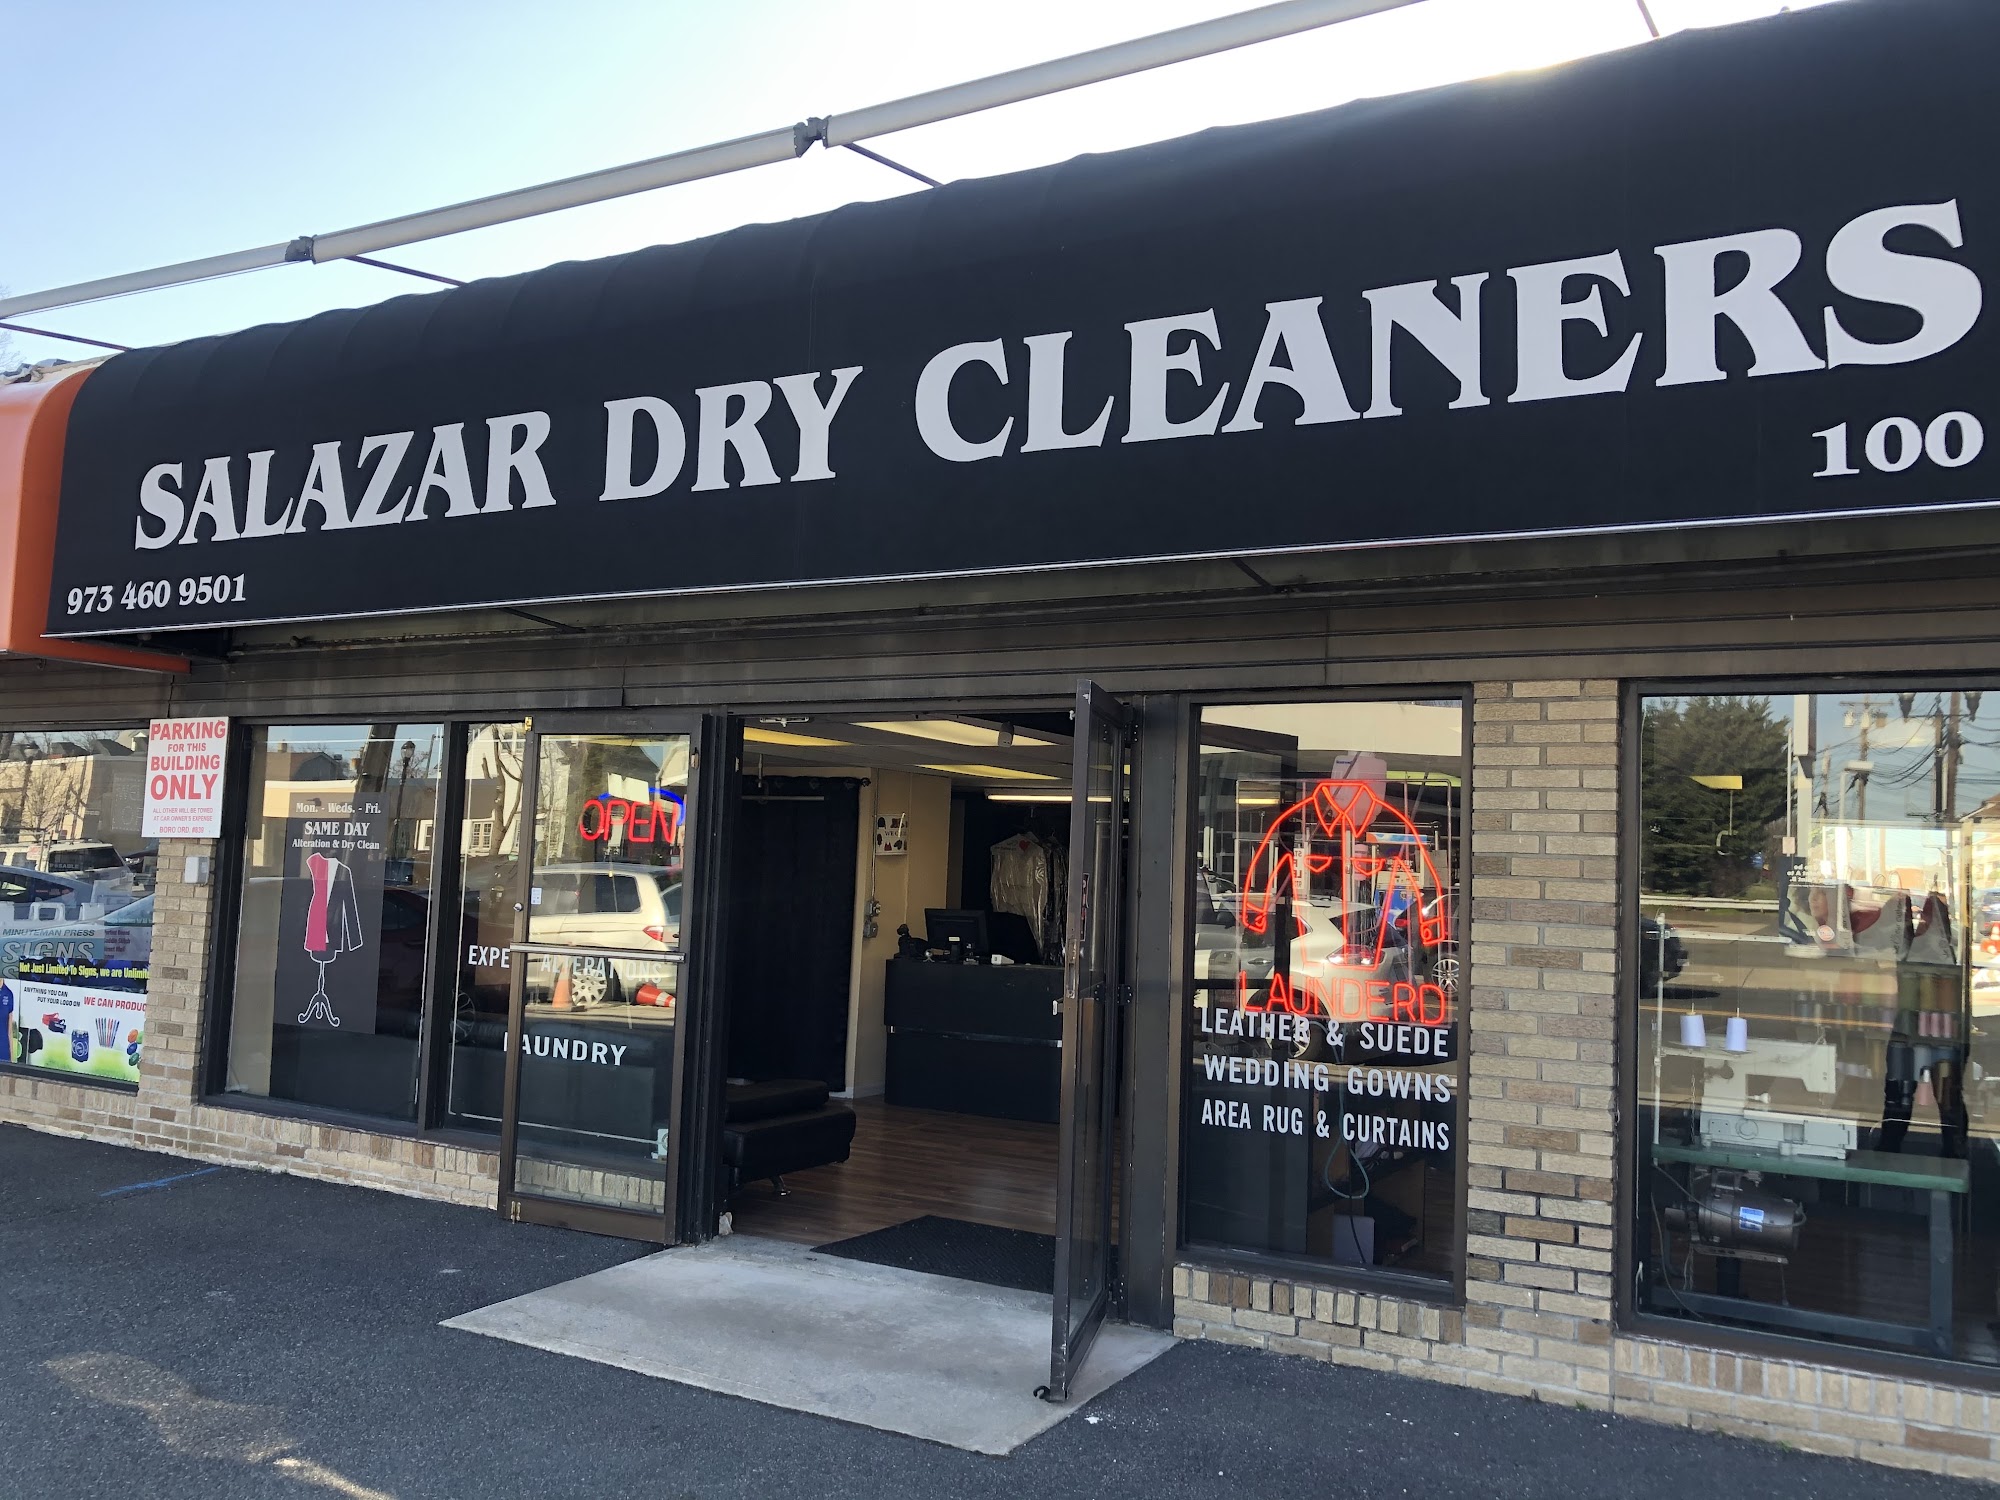 Salazar Dry Cleaners